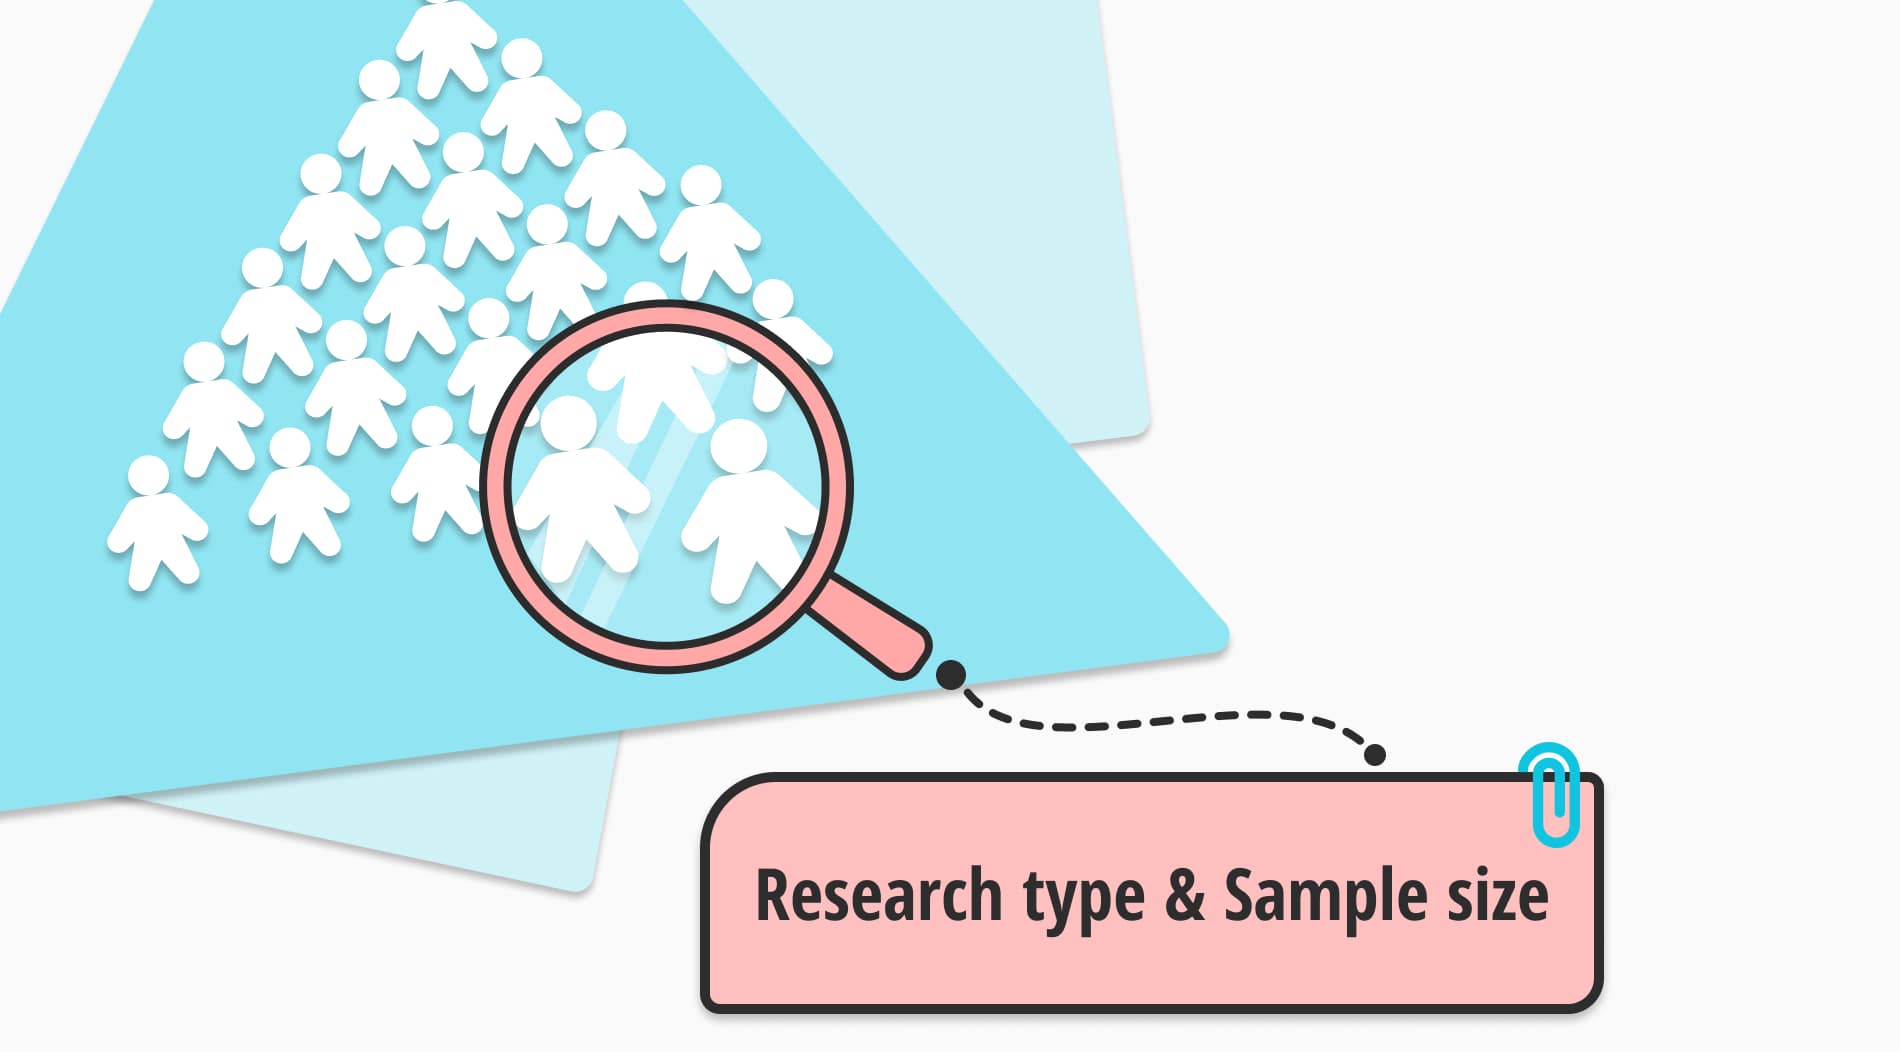 Research type and sample size: Is there a correlation?